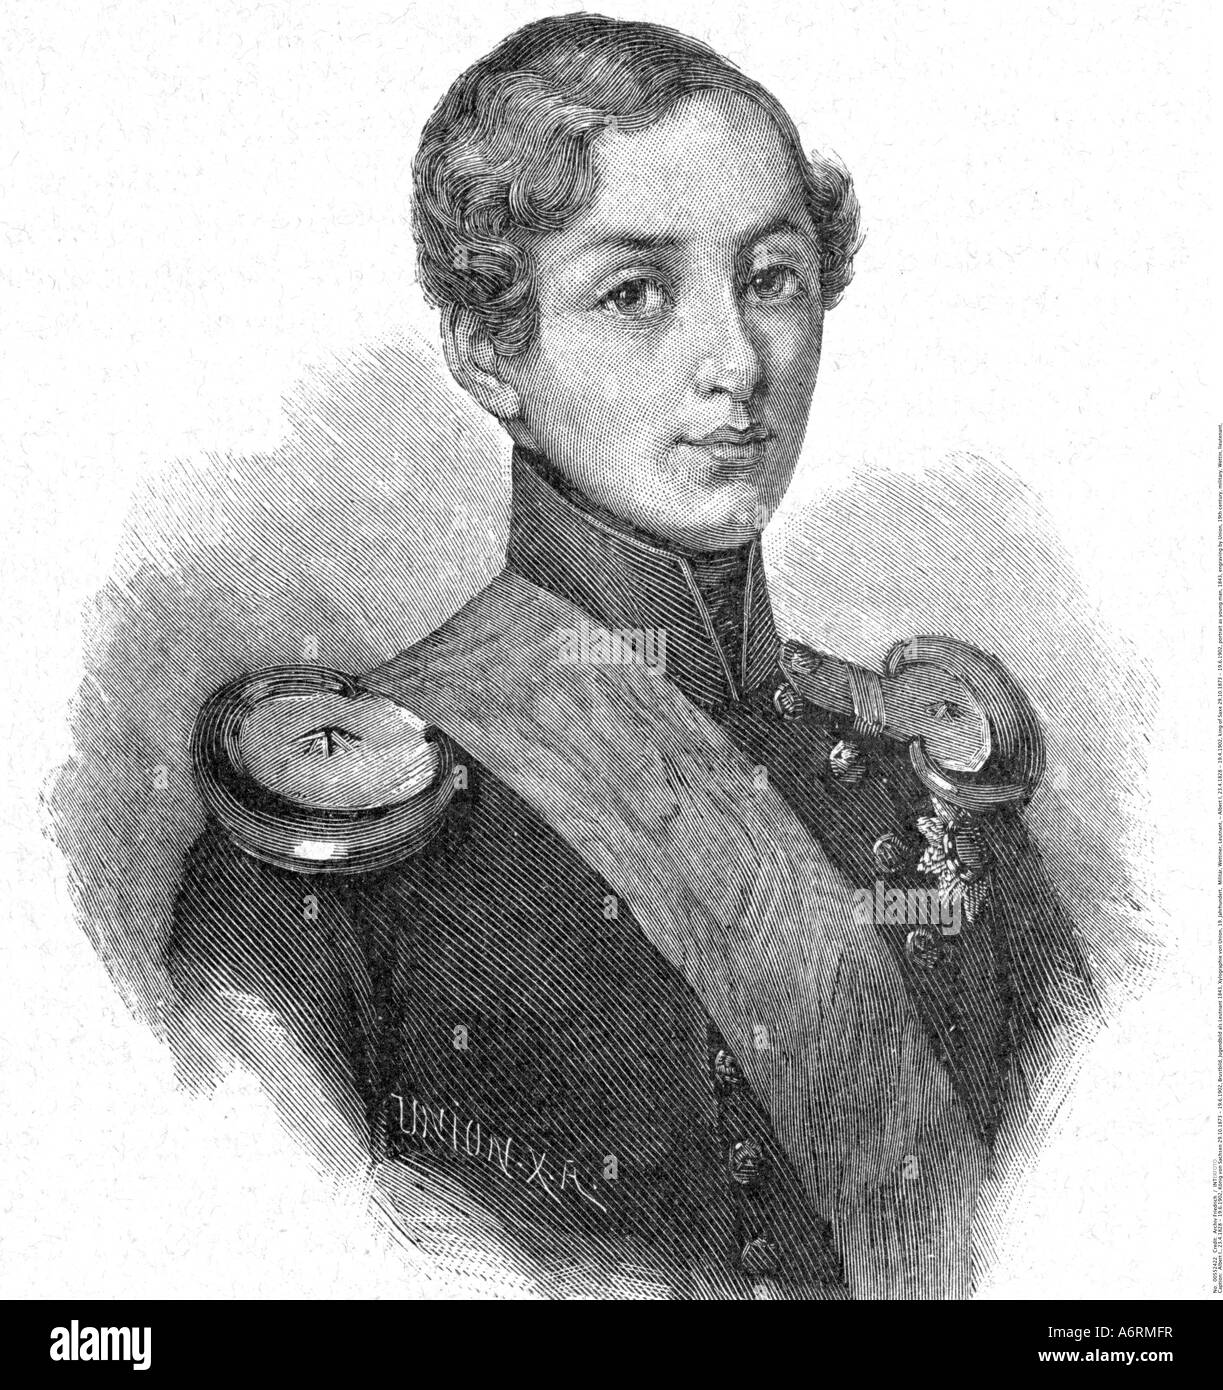 Albert I, 23.4.1828 - 19.4.1902, king of Saxony 29.10.1873 - 19.6.1902, portrait as young man, engraving by X. A. Union, circa 1 Stock Photo